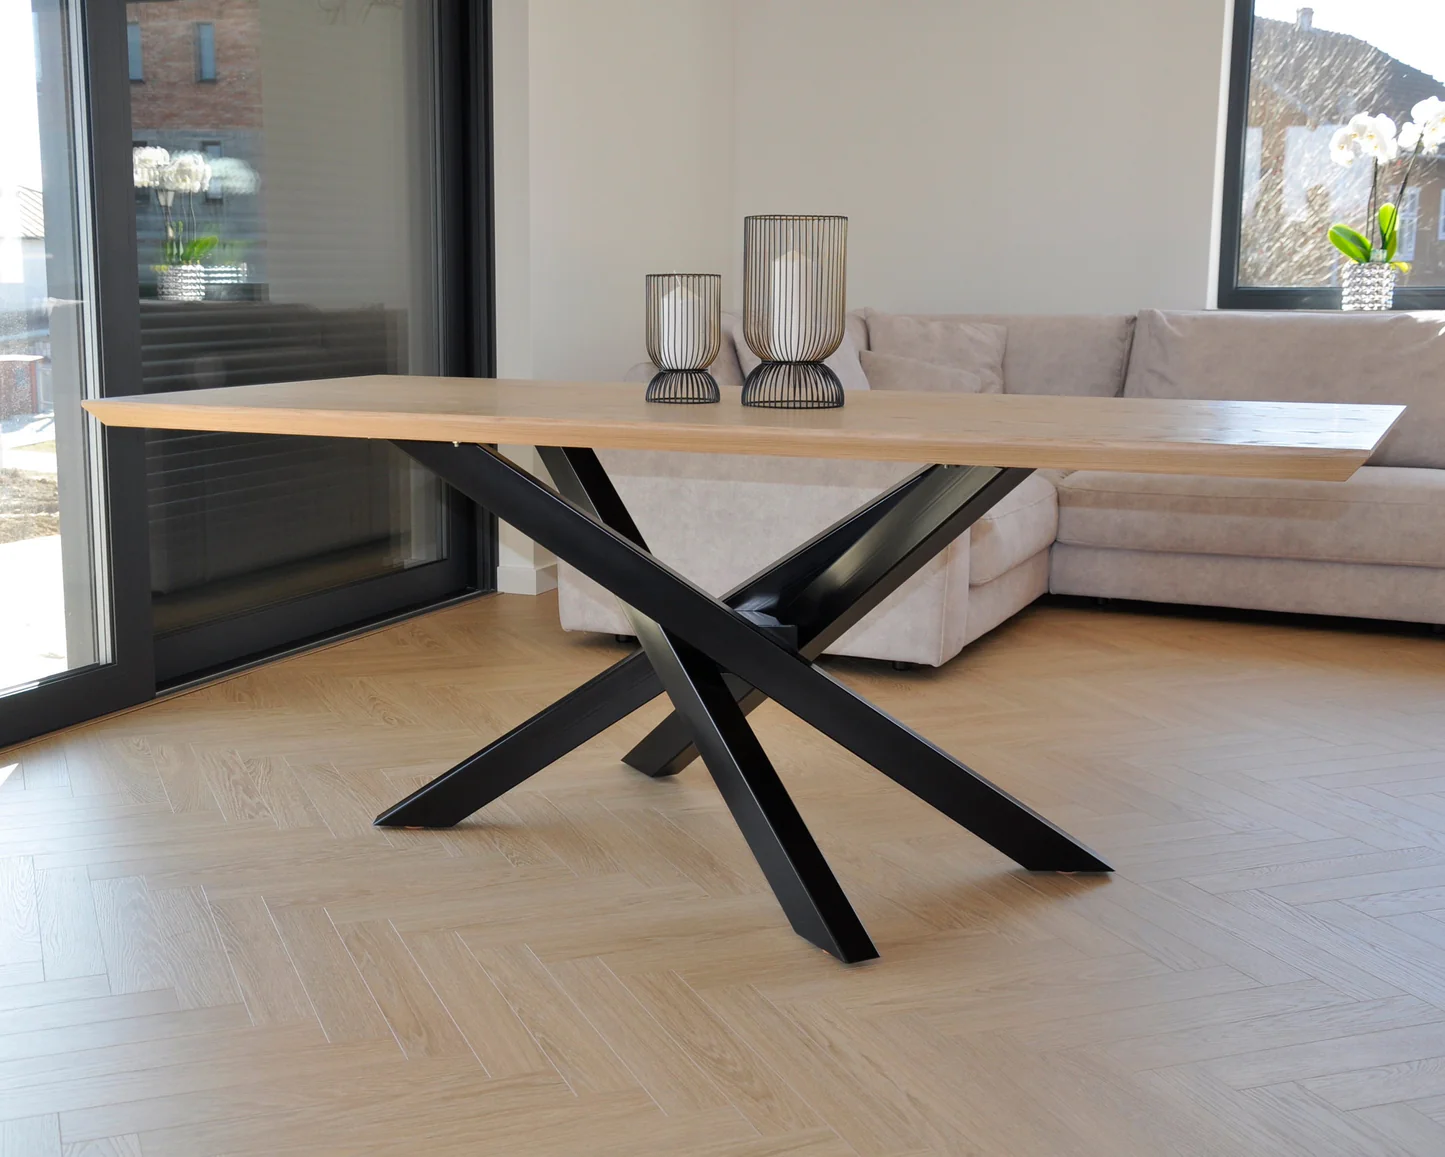 Black Metal Table Legs: Adding Elegance and Stability to Your Furniture